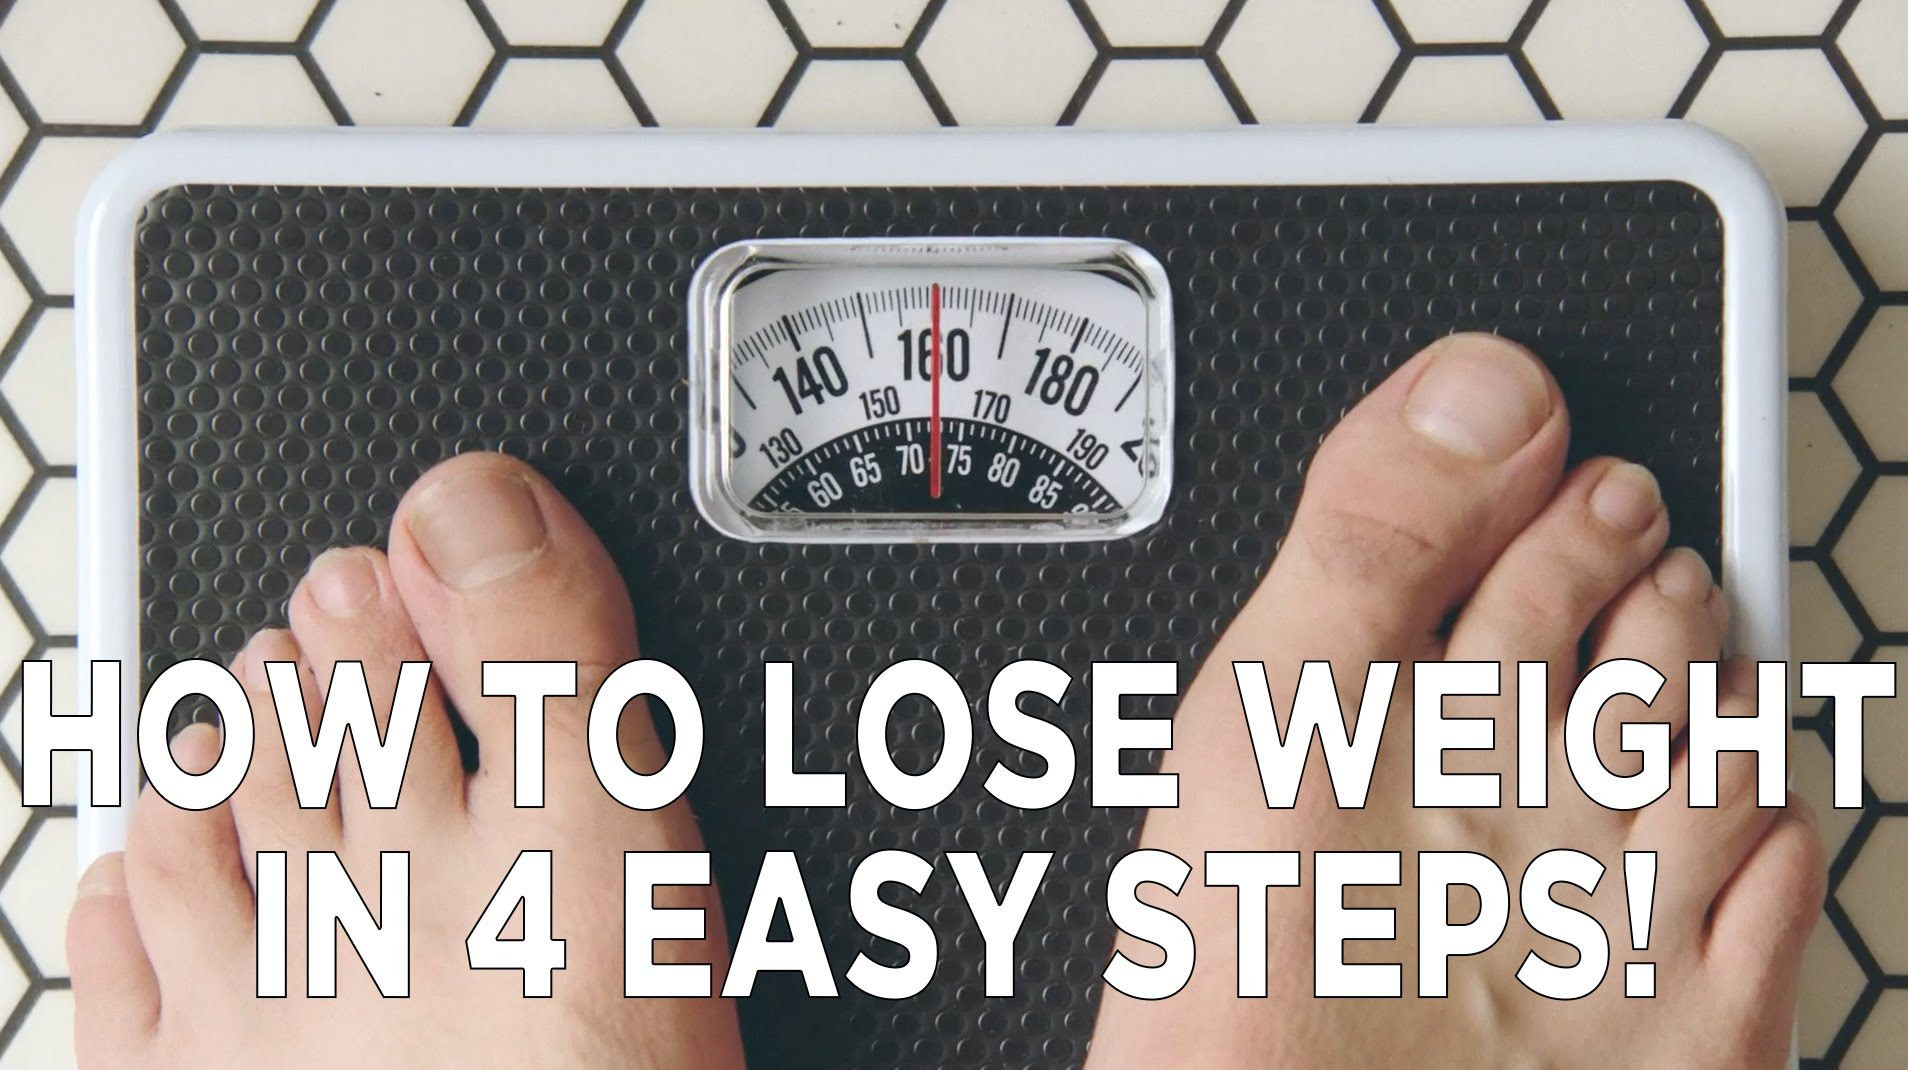 How To Lose Weight Easy
 How To Lose Weight In 4 Easy Steps VIDEO